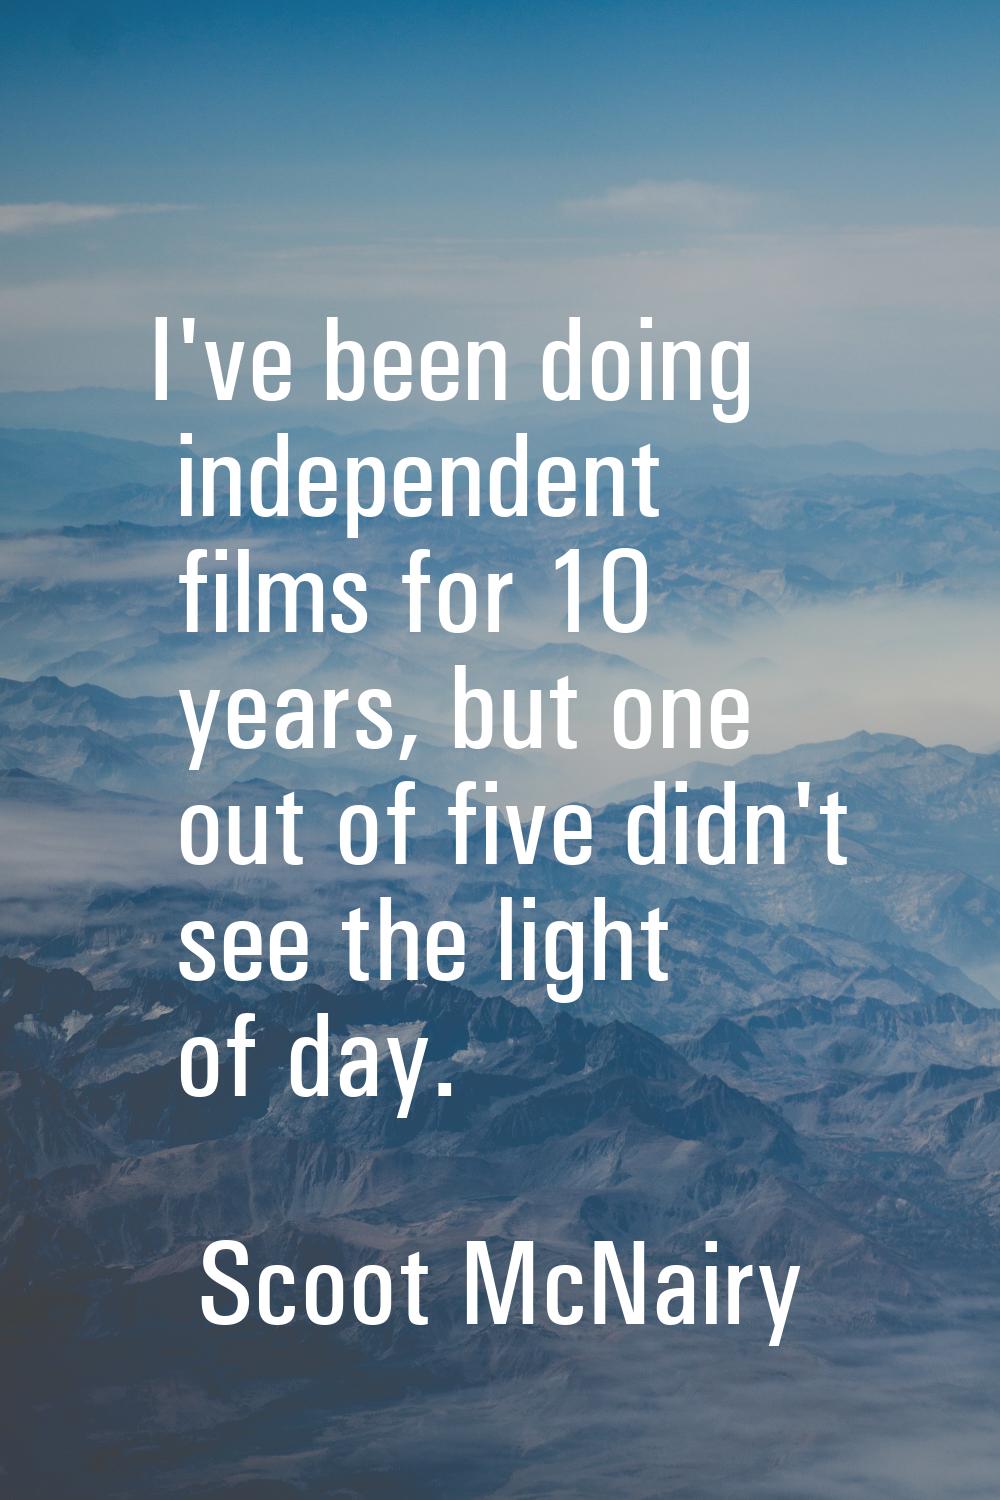 I've been doing independent films for 10 years, but one out of five didn't see the light of day.